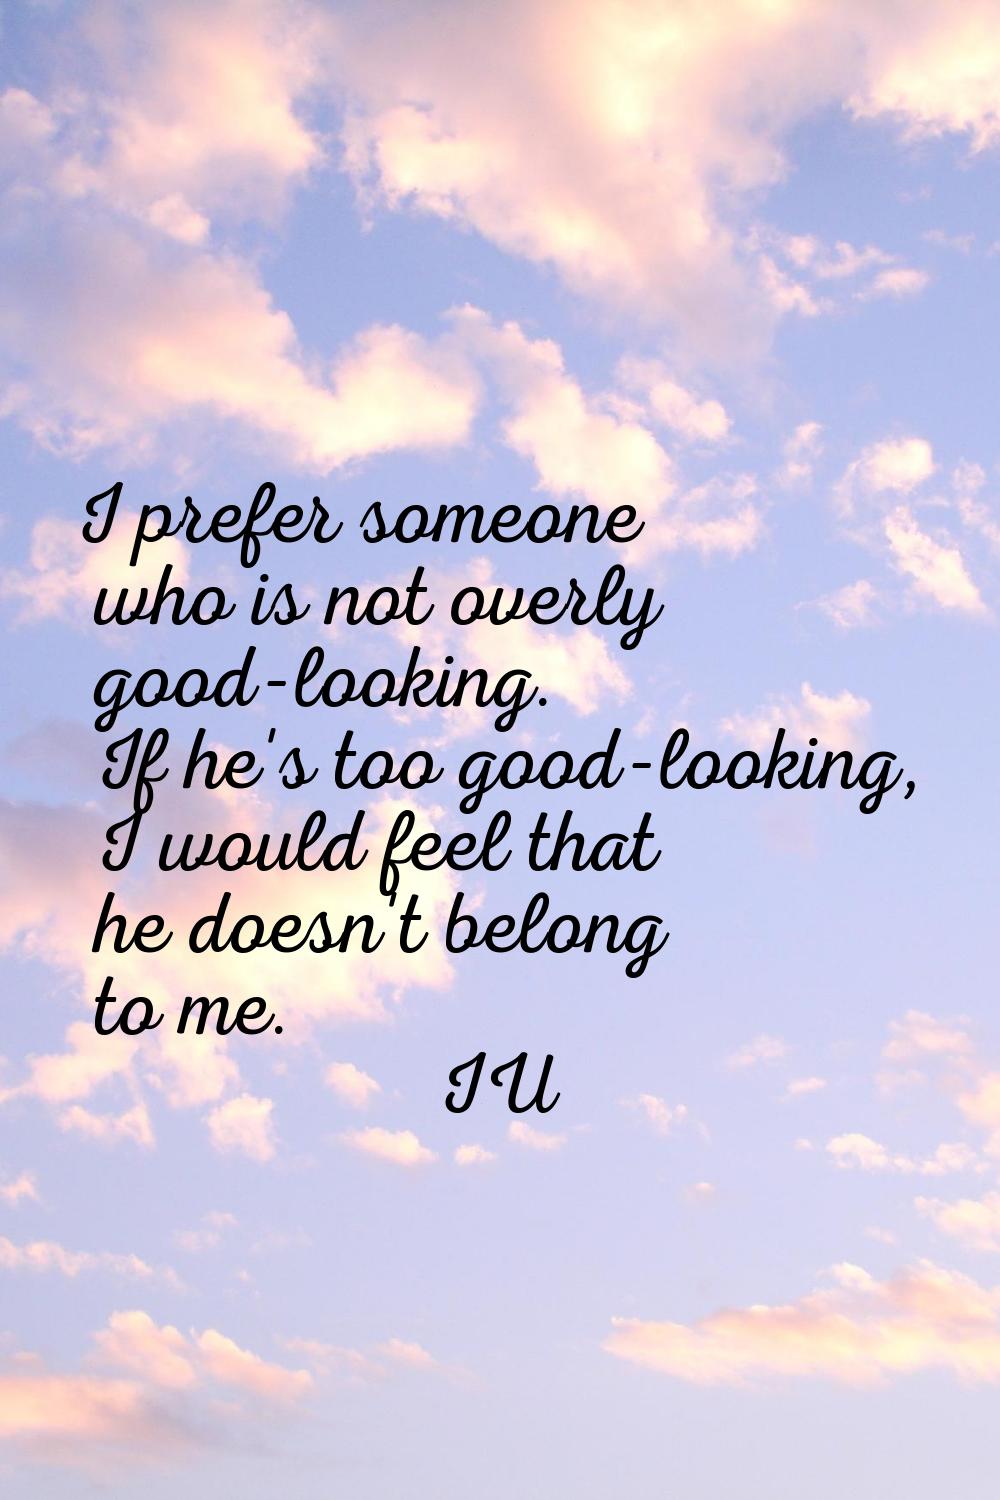 I prefer someone who is not overly good-looking. If he's too good-looking, I would feel that he doe